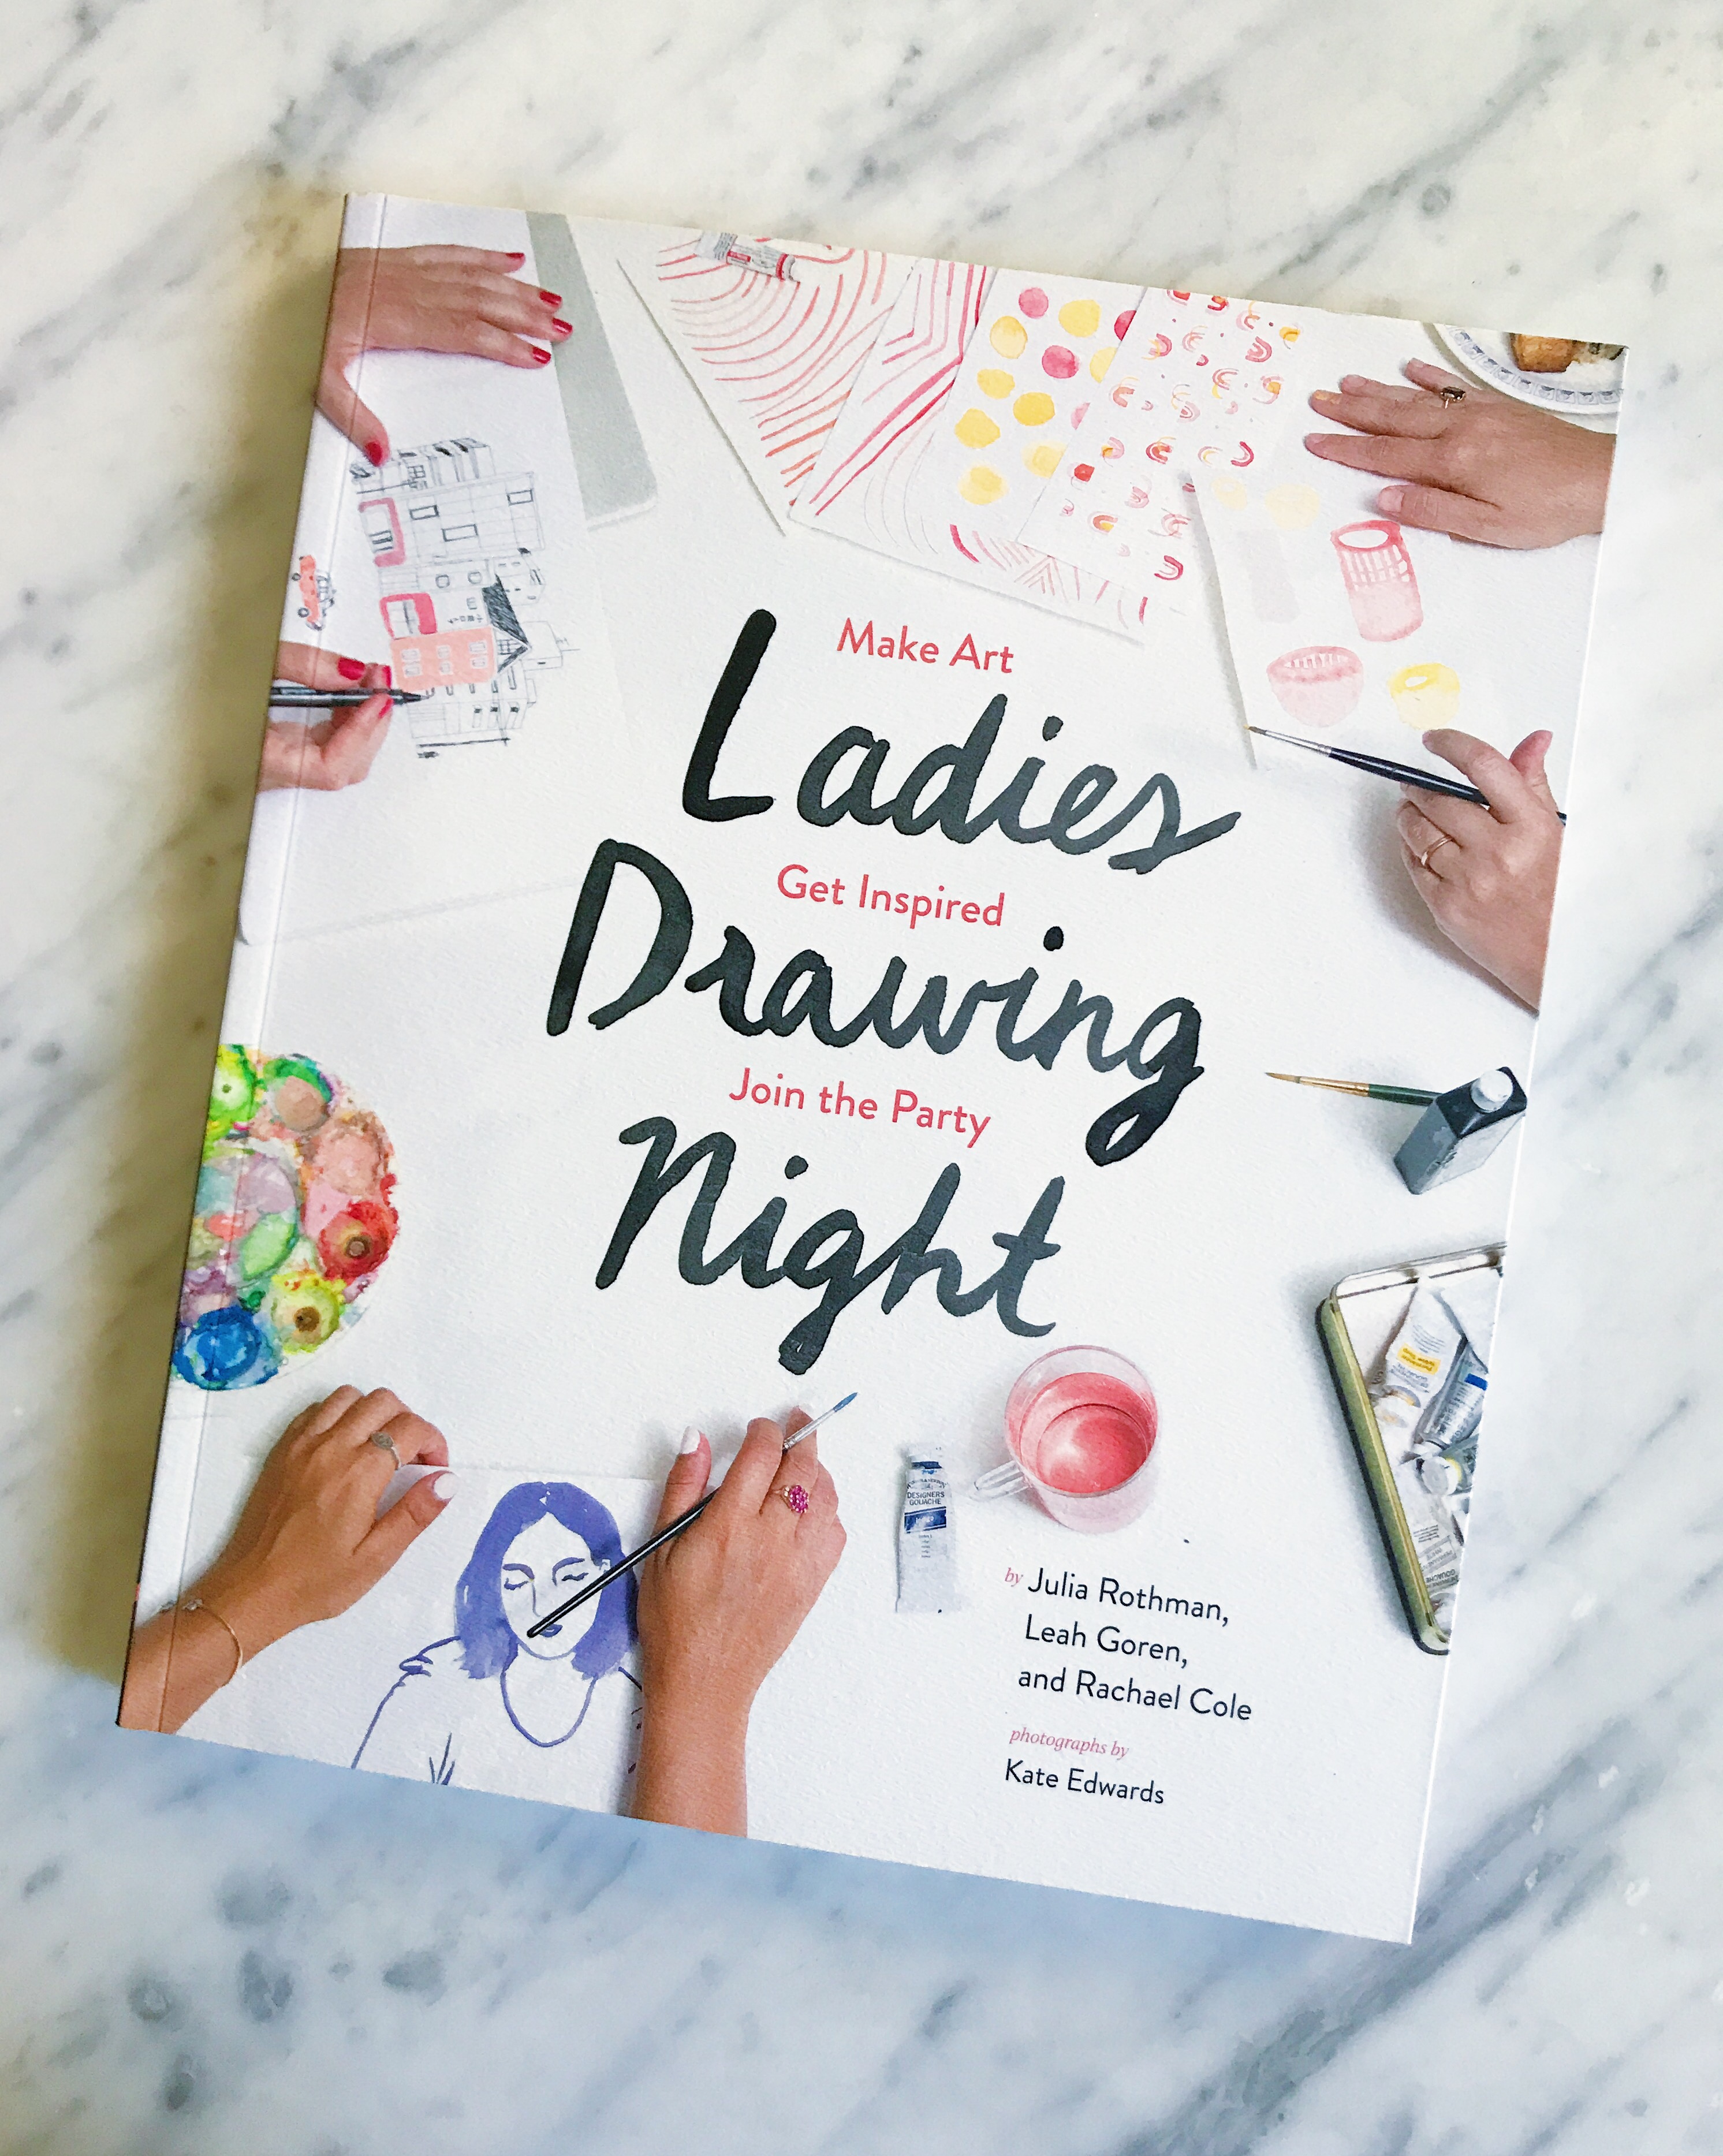 Ladies Drawing Night by Leah Goren, Julia Rothman, and Rachael Cole